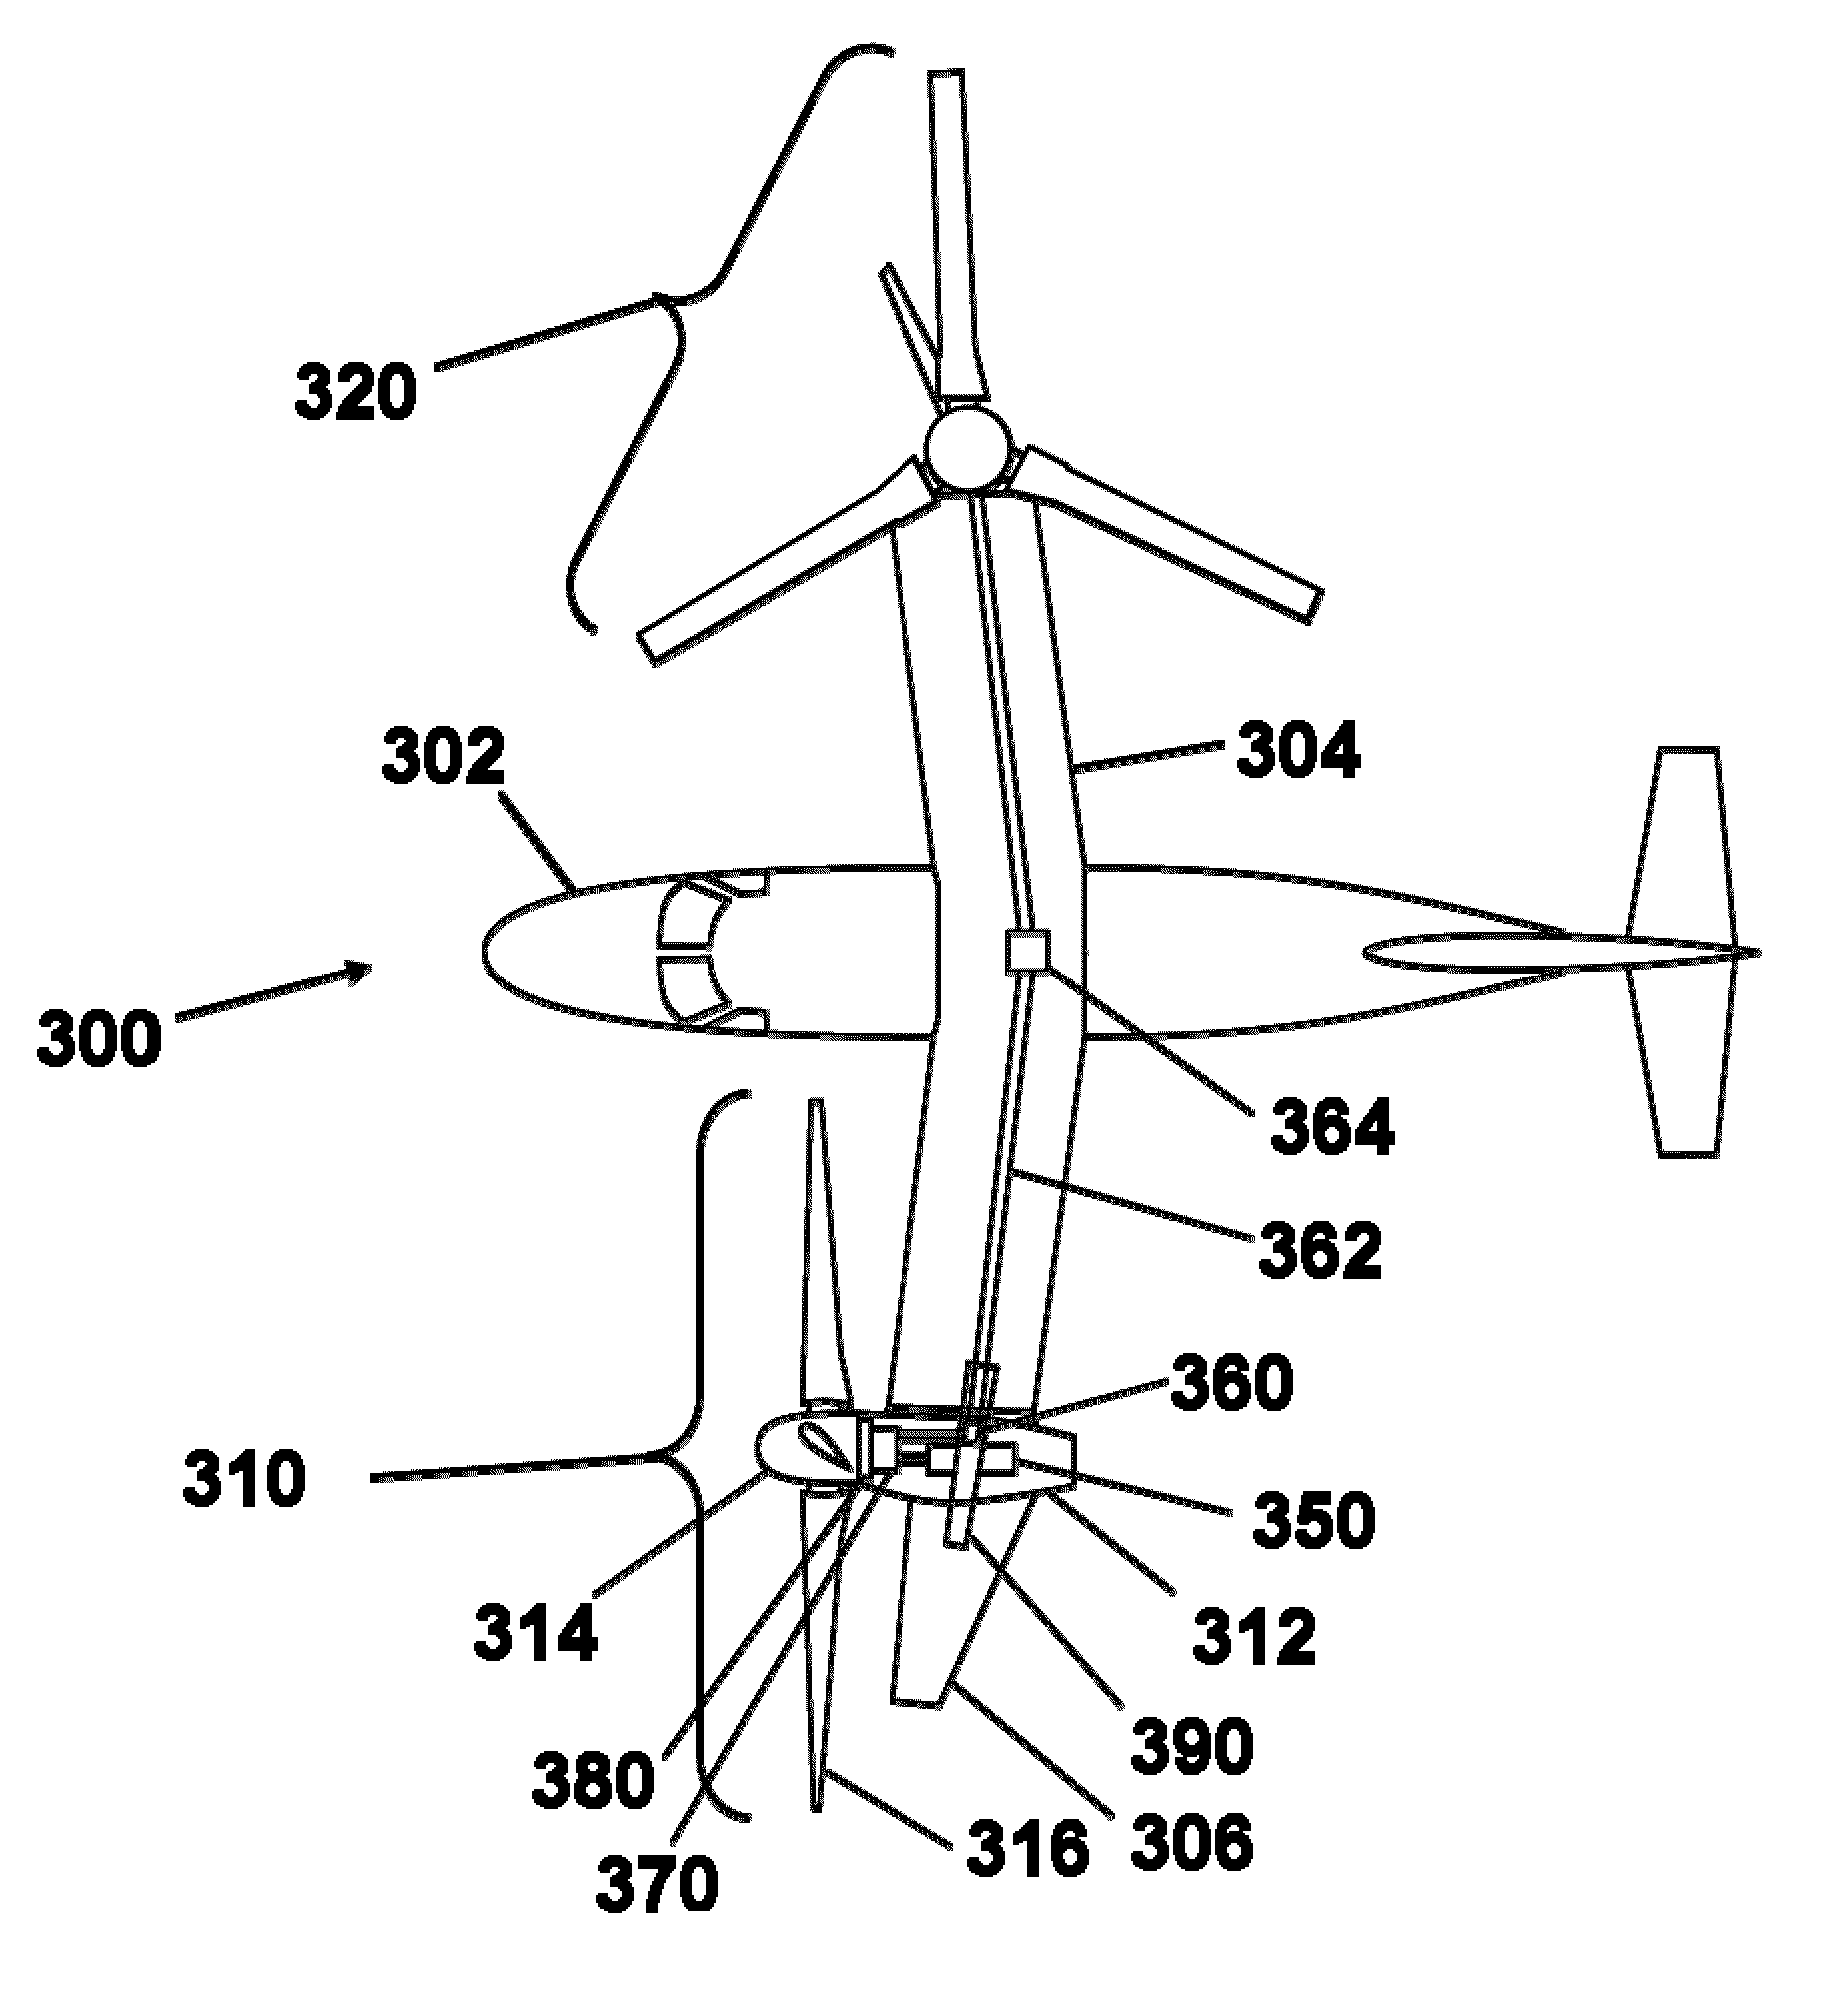 Combination spar and trunnion structure for a tilt rotor aircraft